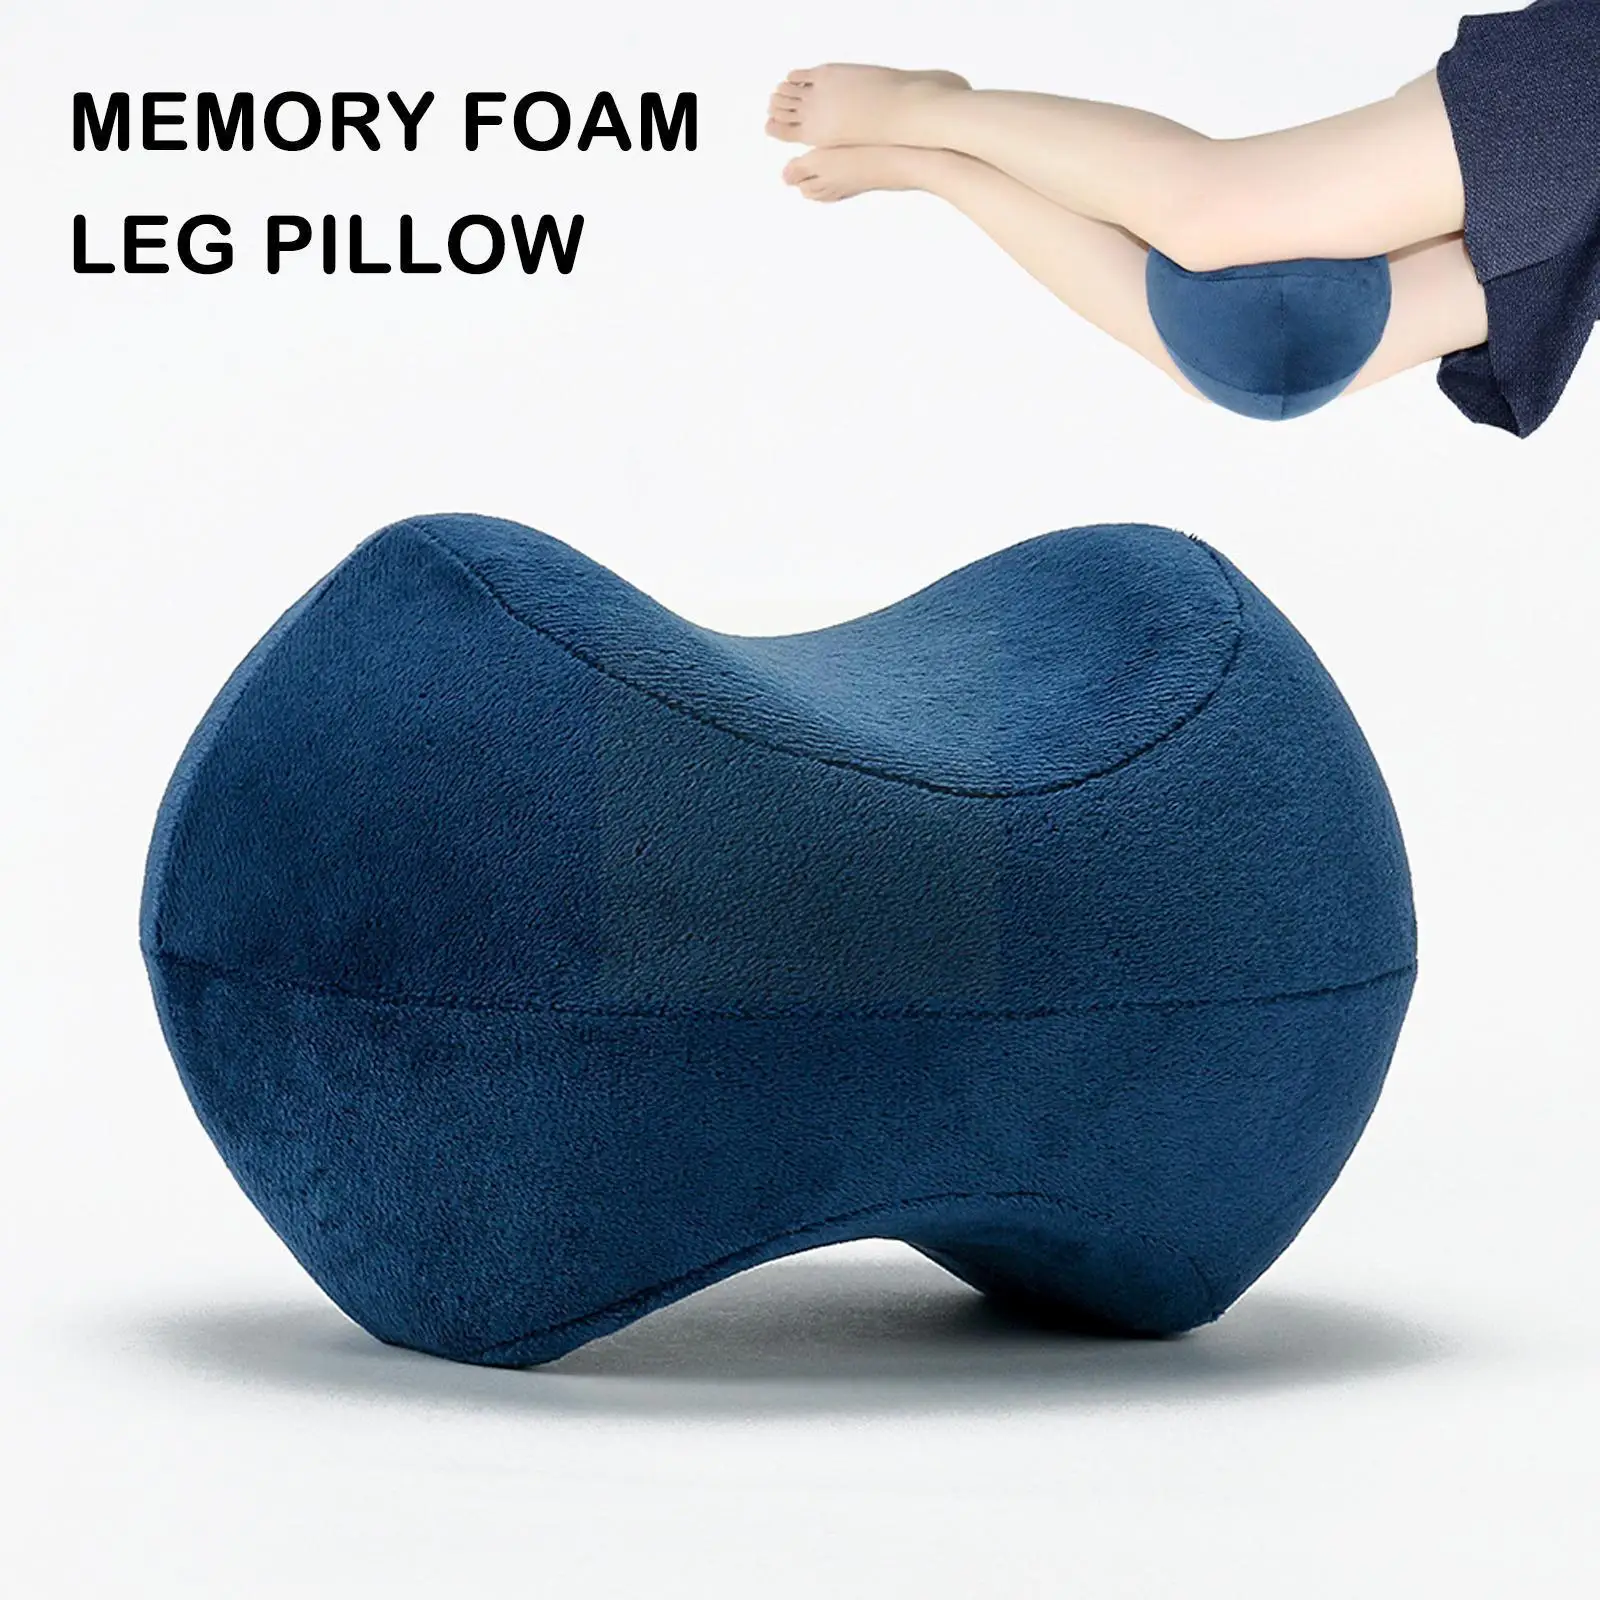 

Orthopedic Pillow for Sleeping Memory Foam Leg Positioner Pillows Knee Support Cushion between the Legs for Hip Pain Sciati Z3N3